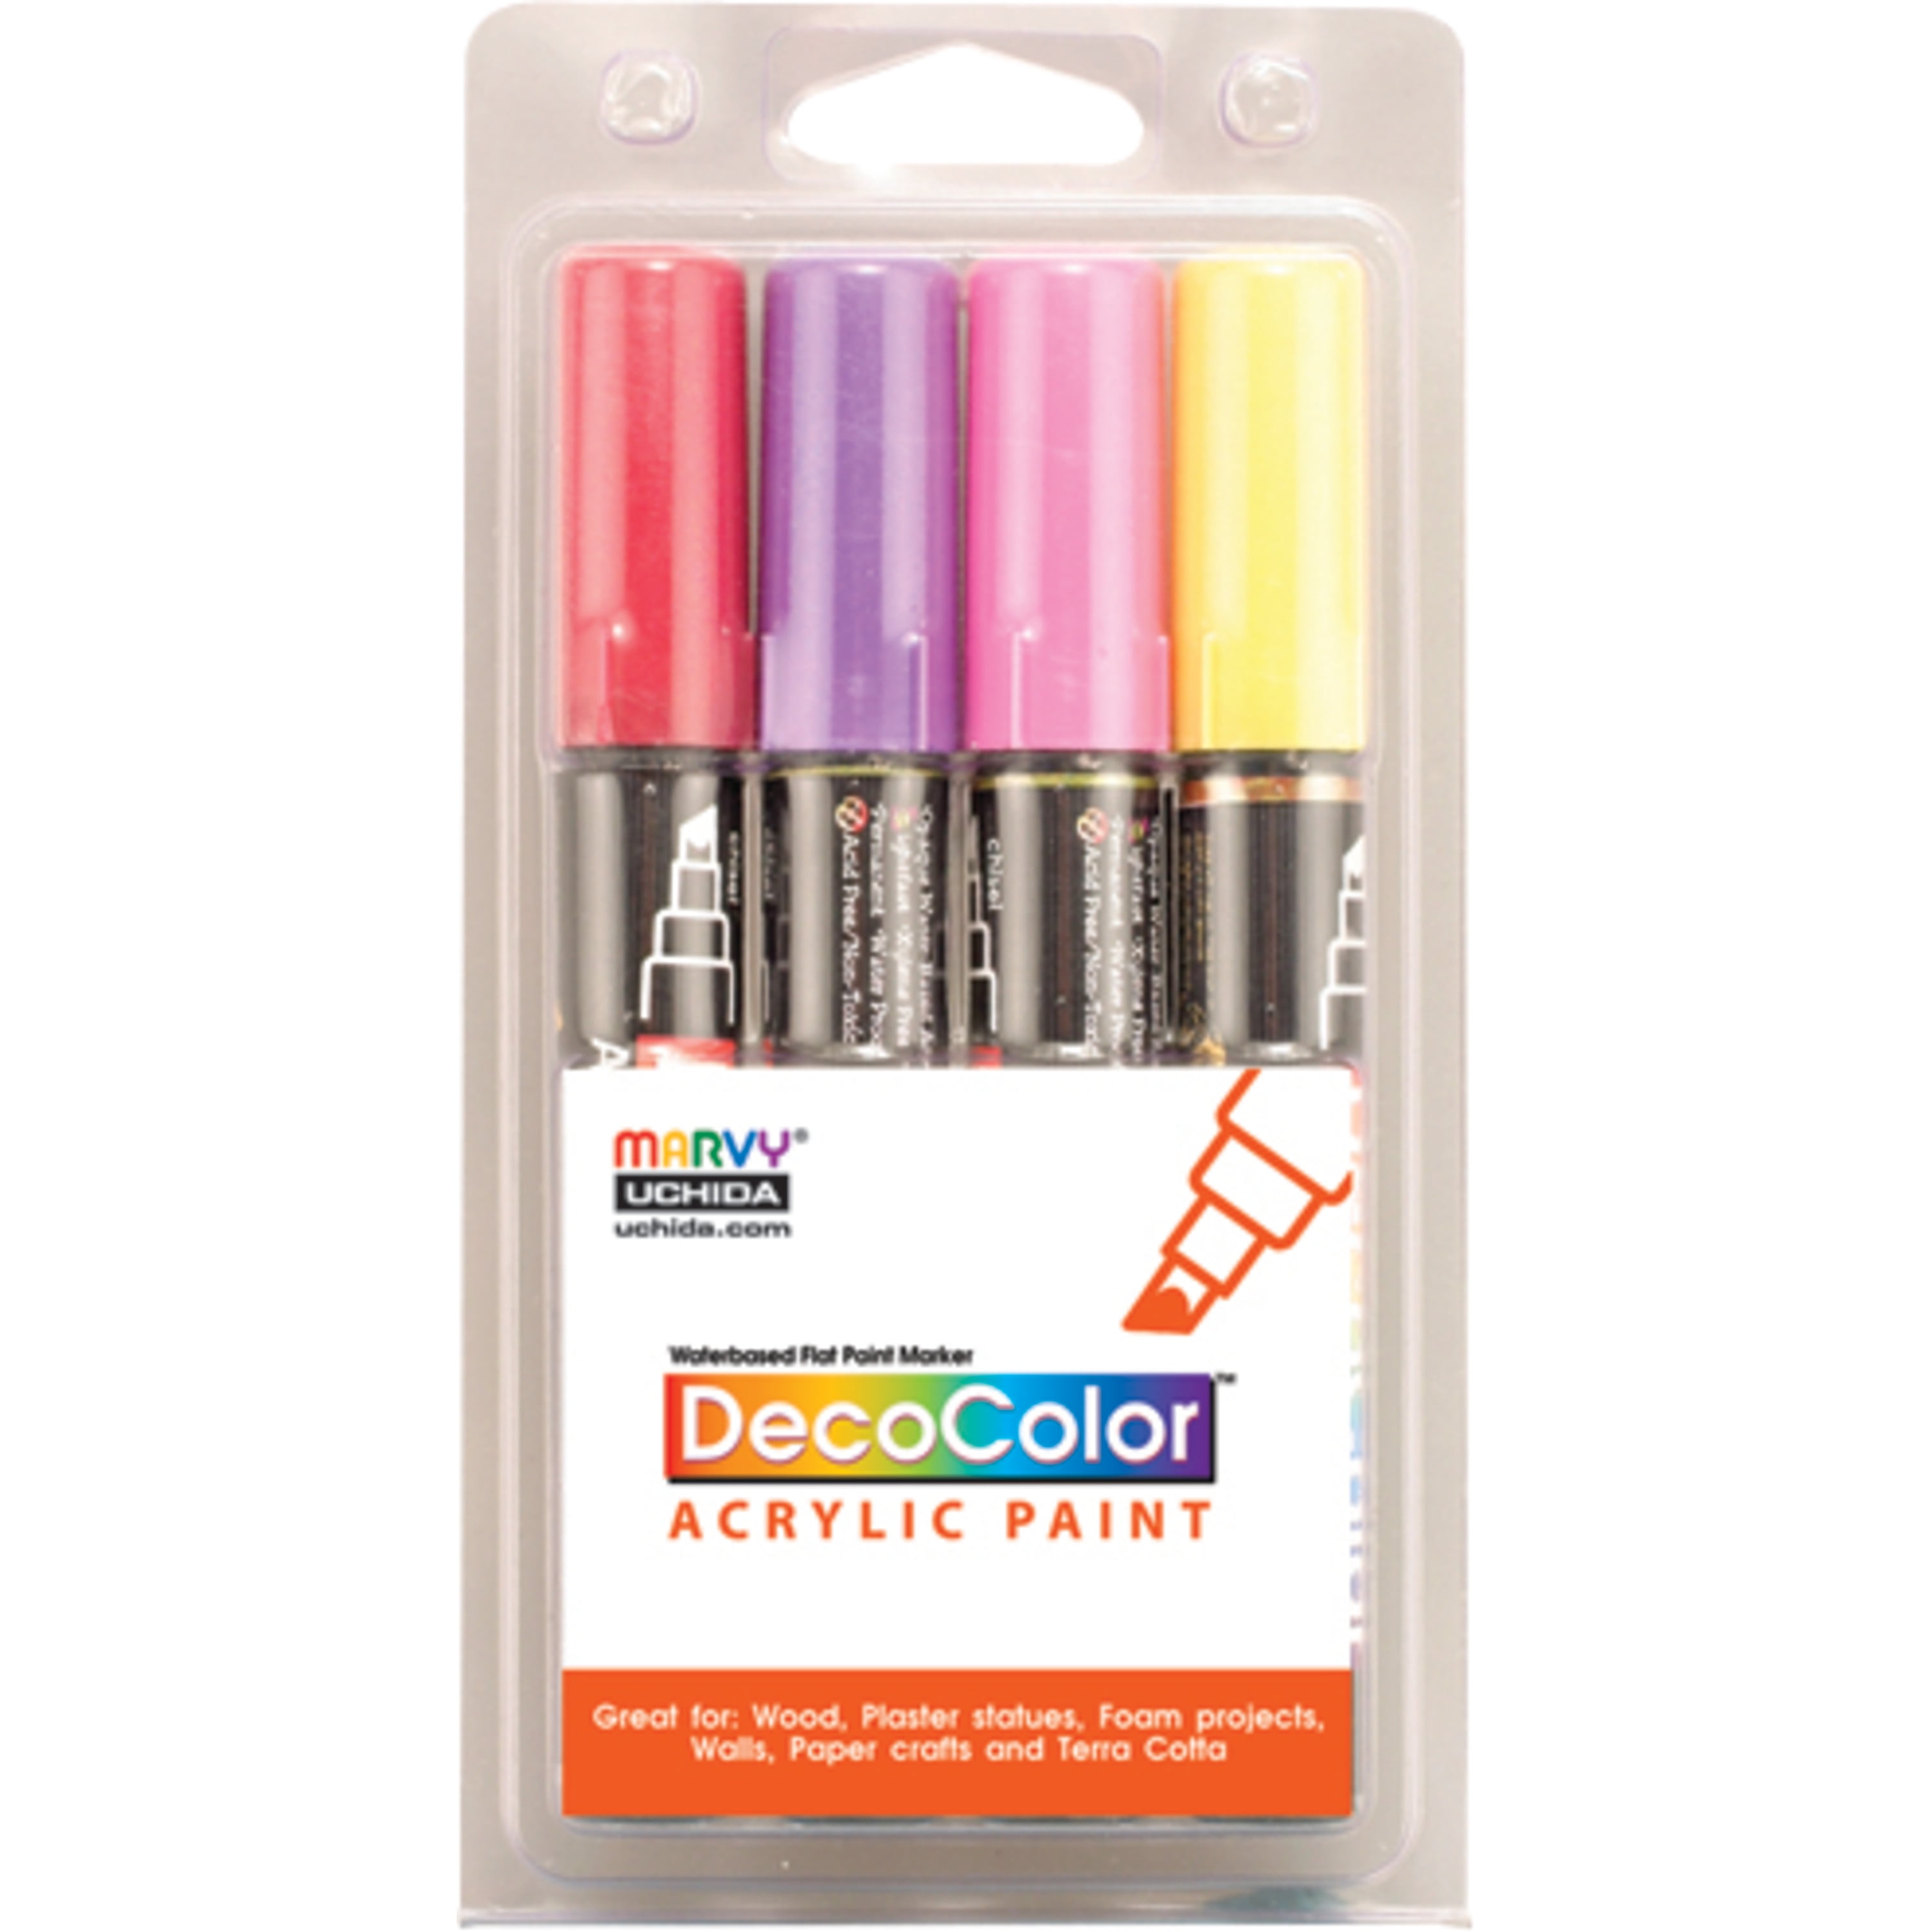 TOOLI-ART 24 Neon Fluorescent Acrylic Paint Pens Marker Set 0.7mm Extra Fine and 3.0mm Medium Tip Combo for Rocks, Glass, Mugs, Most surfaces. Non